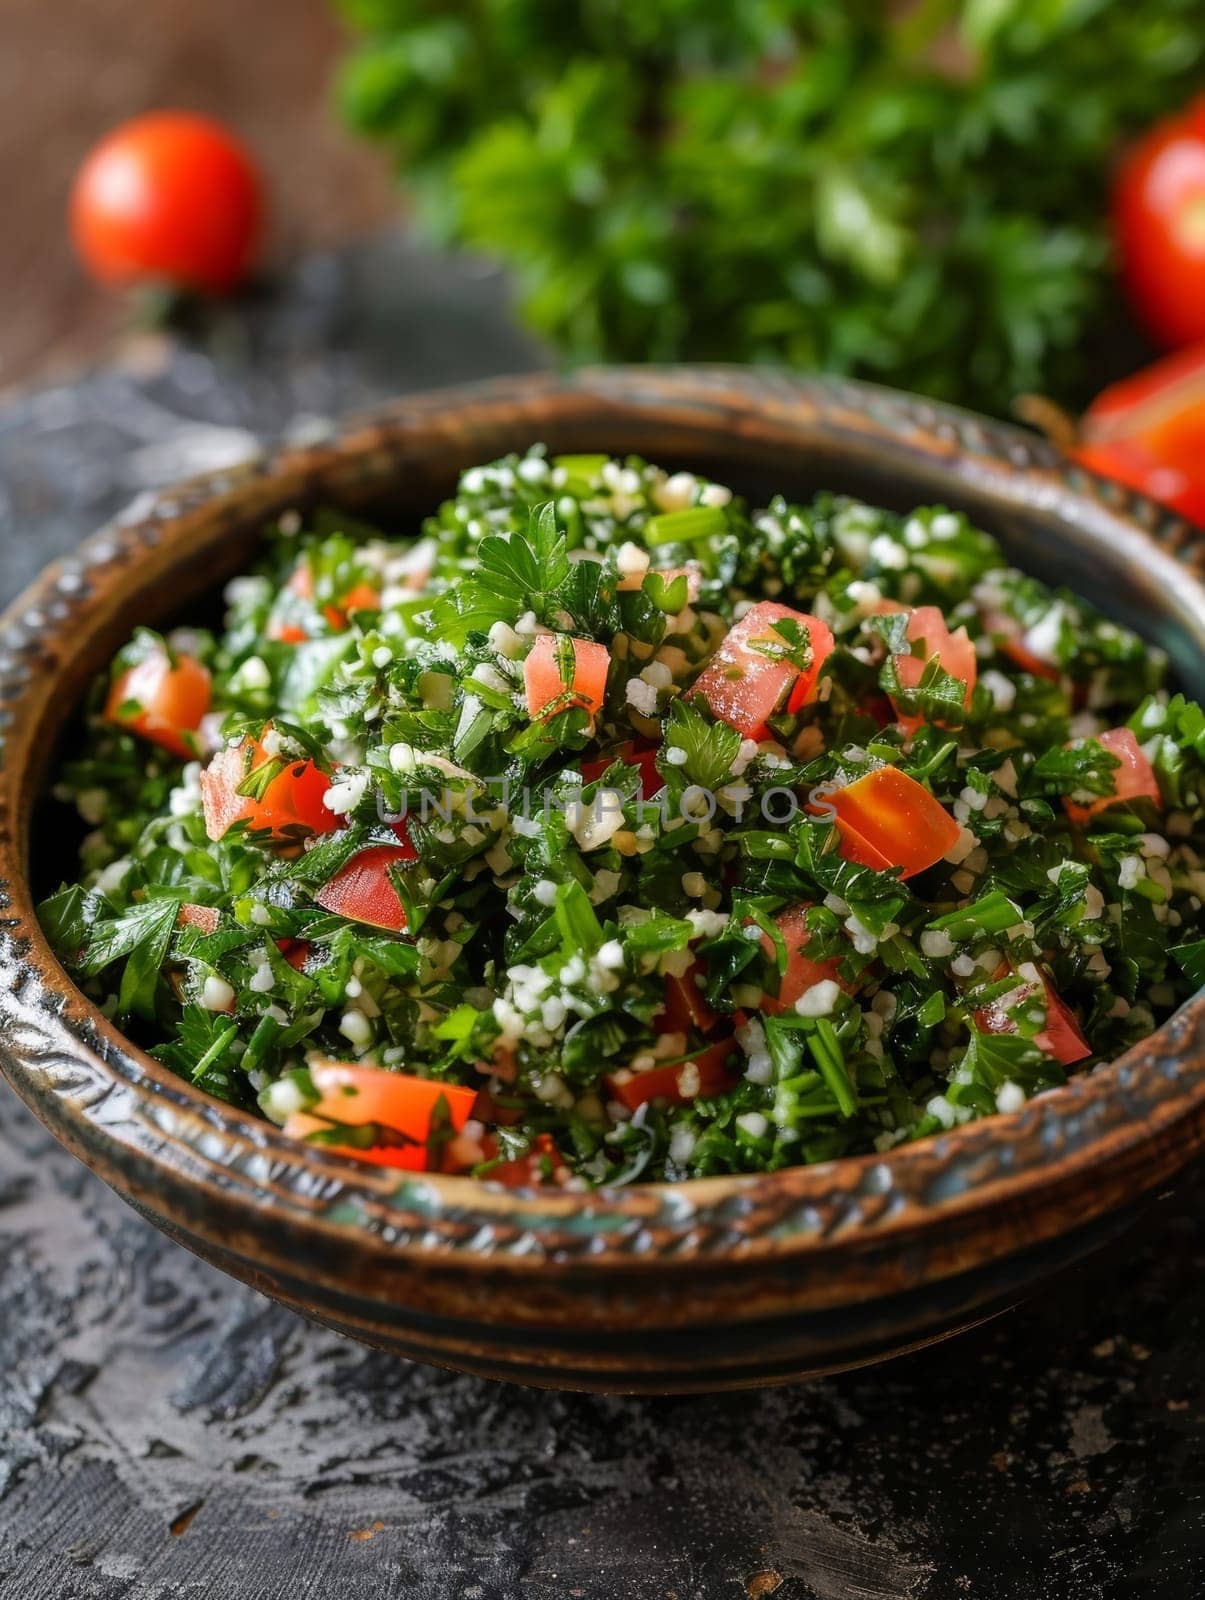 A vibrant and fresh Lebanese tabbouleh salad, featuring finely chopped parsley, ripe tomatoes, and nutty bulgur wheat, presented in a small bowl for a healthy and authentic Middle Eastern culinary. by sfinks